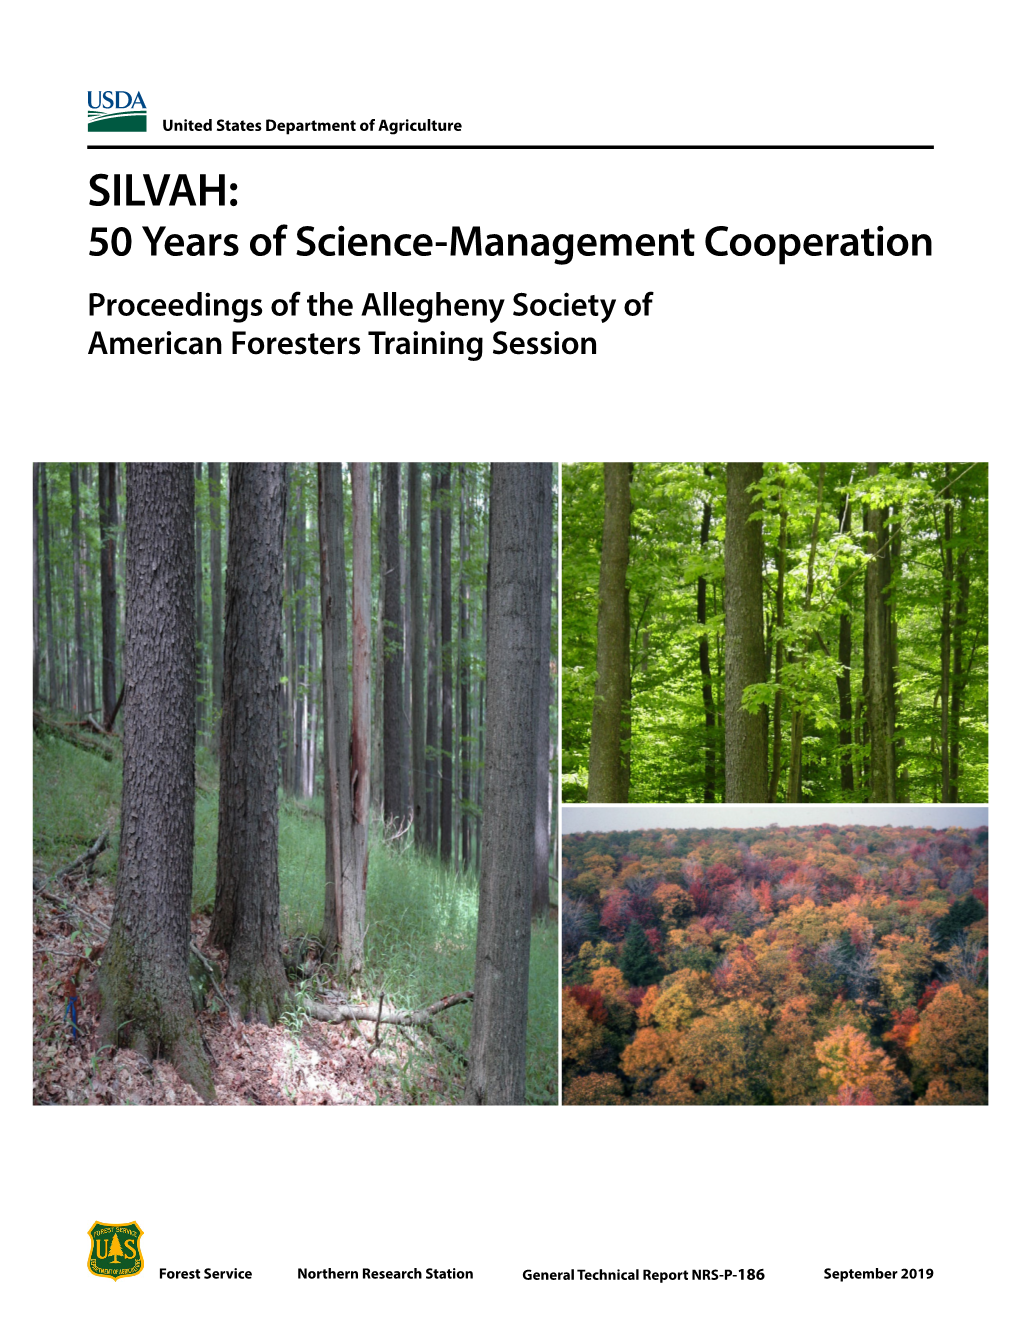 SILVAH: 50 Years of Science-Management Cooperation Proceedings of the Allegheny Society of American Foresters Training Session